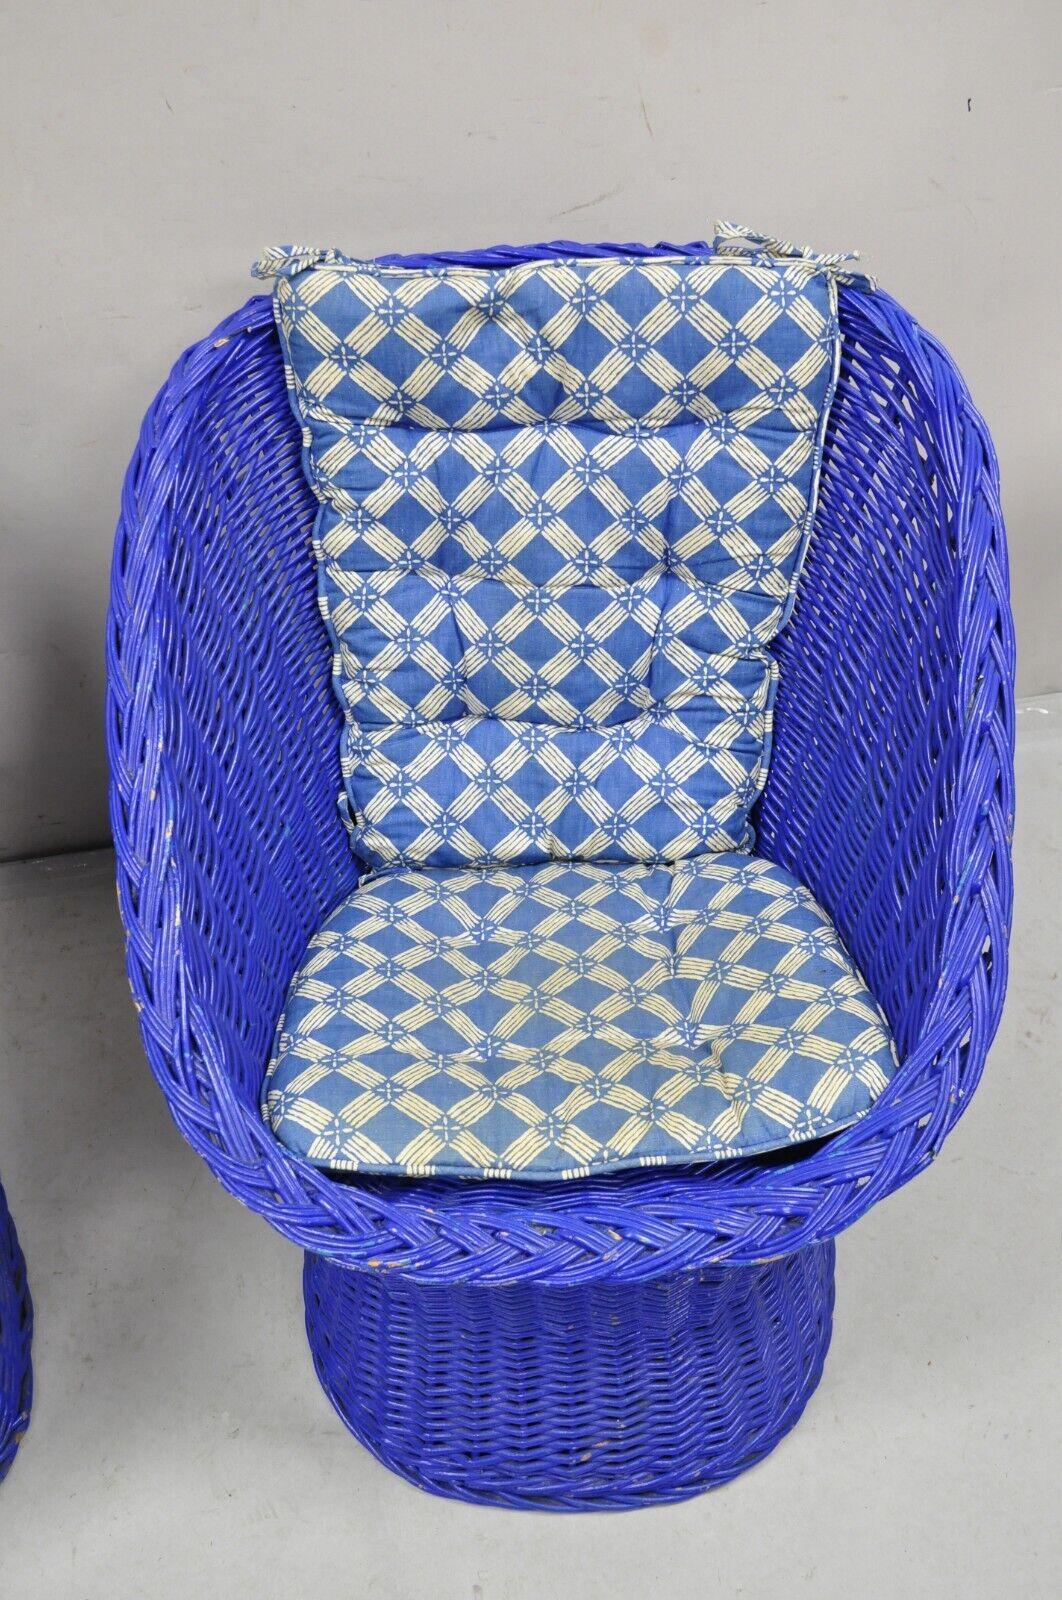 20th Century Vintage Mid Century Modern Blue Painted Wicker Rattan Pod Club Chairs - a Pair For Sale